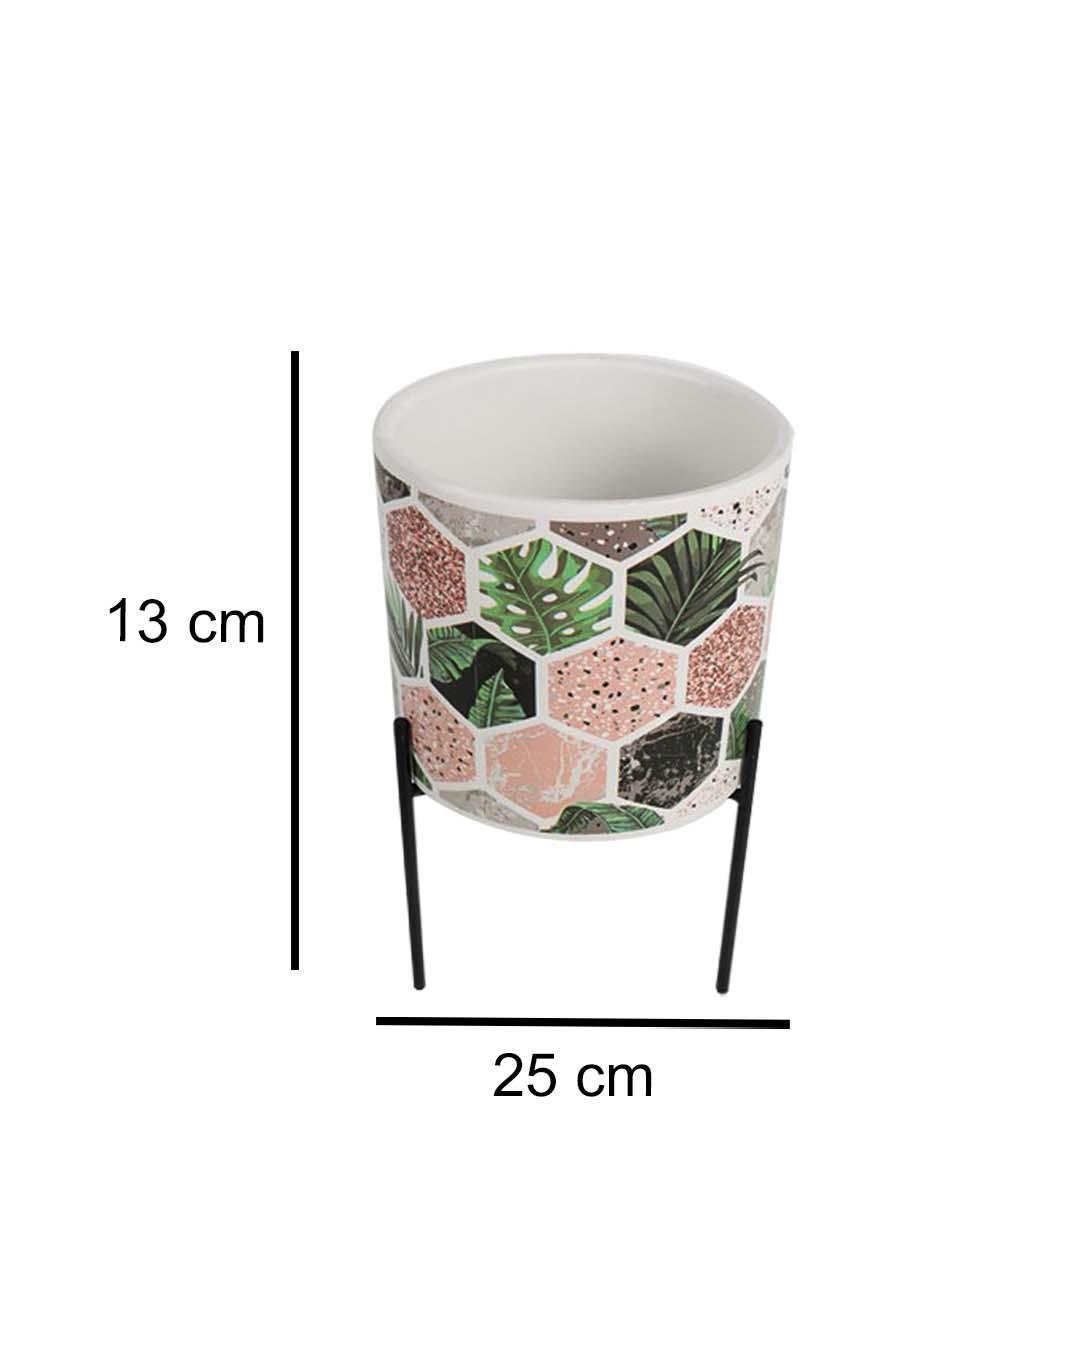 Table Planter with Stand, Botanical Design, Multicolor, Ceramic - MARKET 99